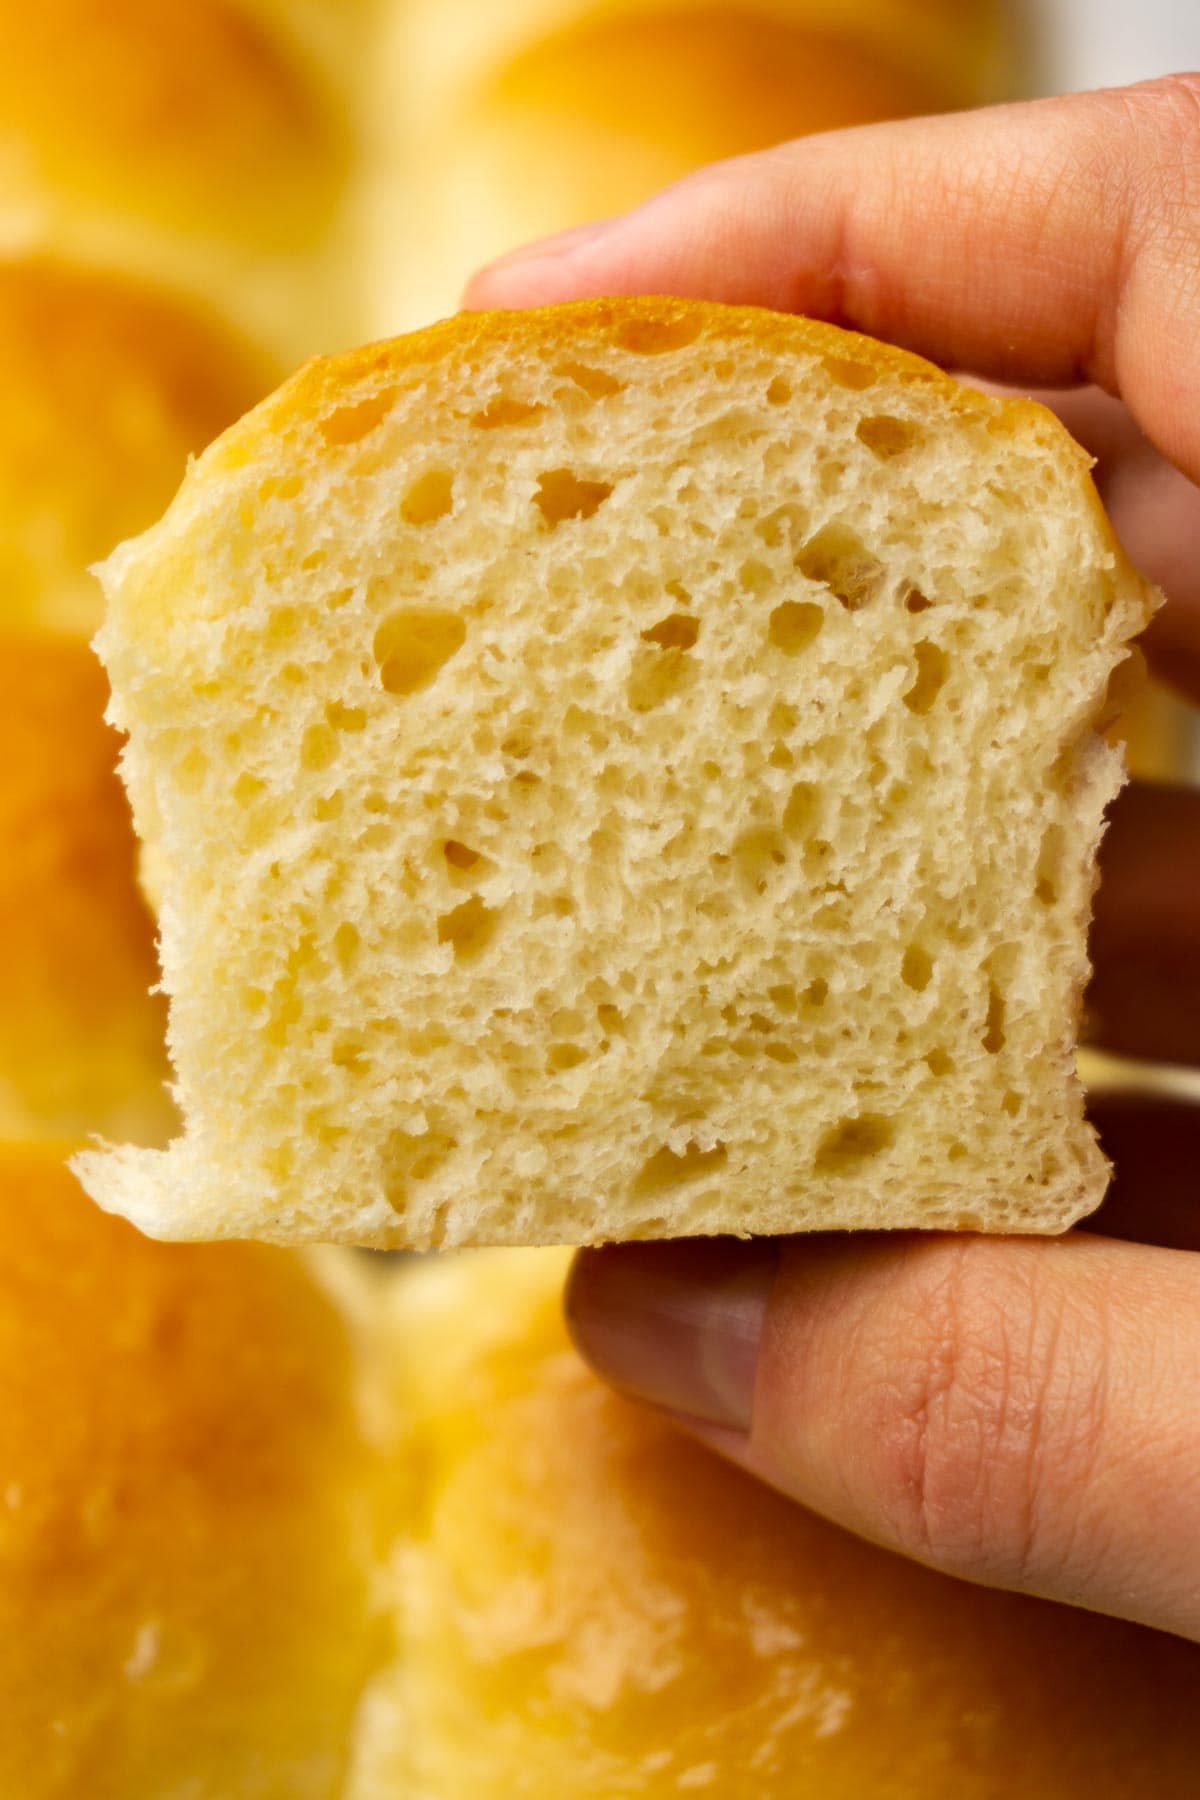 A hand is holding a cut in half soft dinner roll, more rolls on the background.